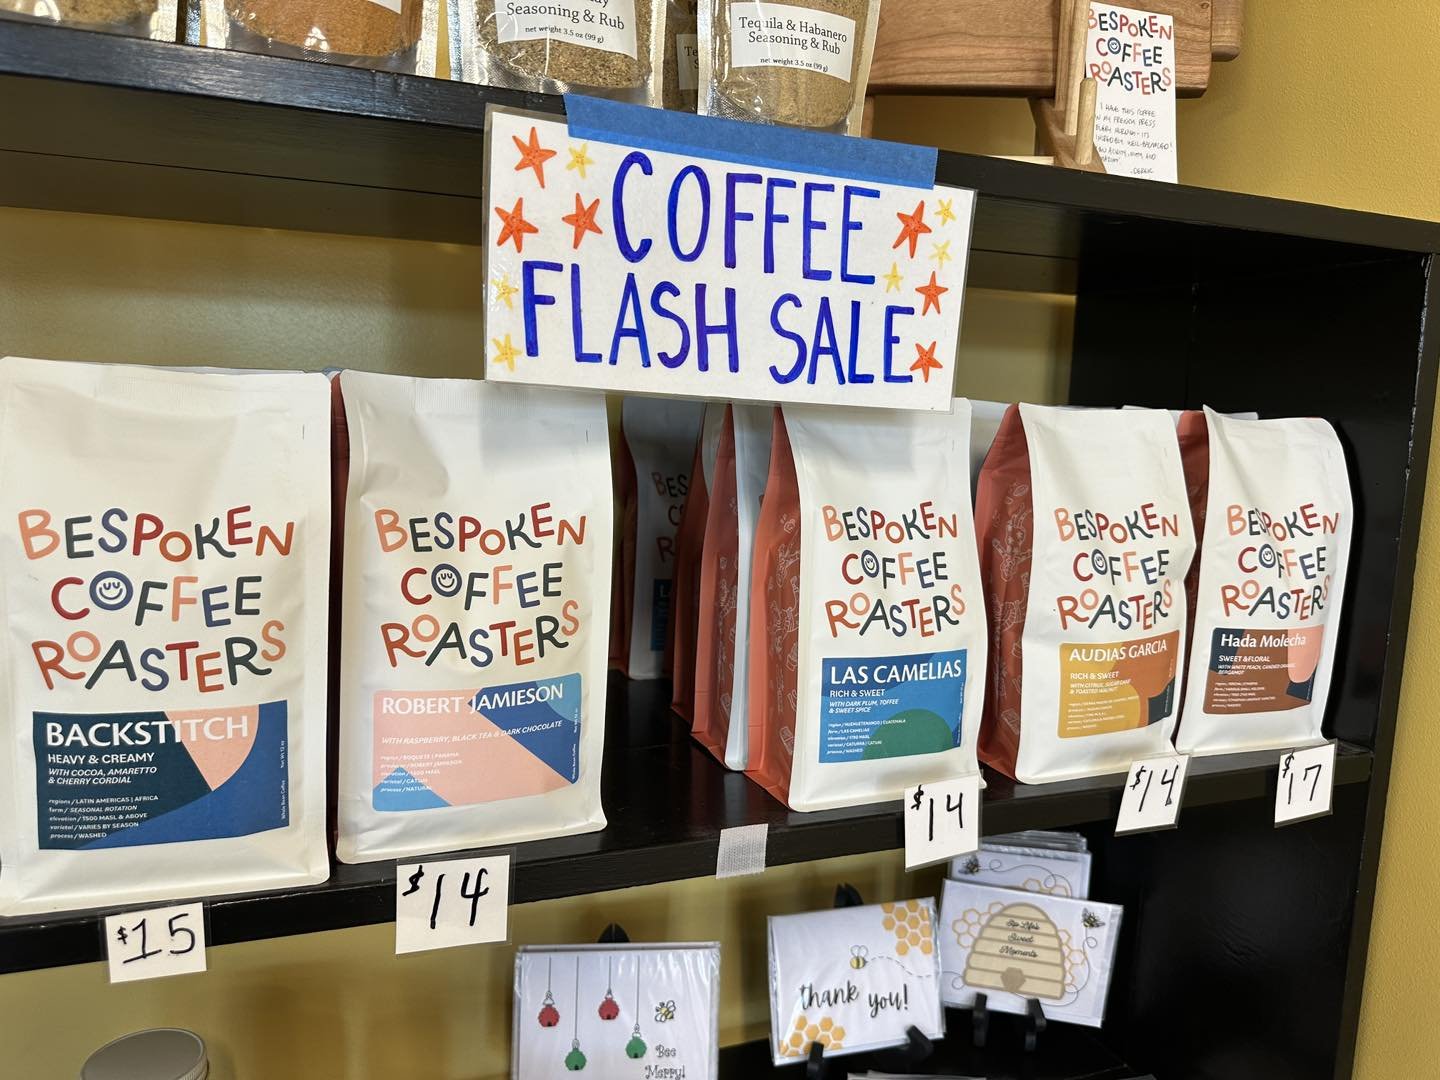 We&rsquo;re having a sale this week on select Bespoken Coffee Roasters coffee beans! Come on down and try something new!